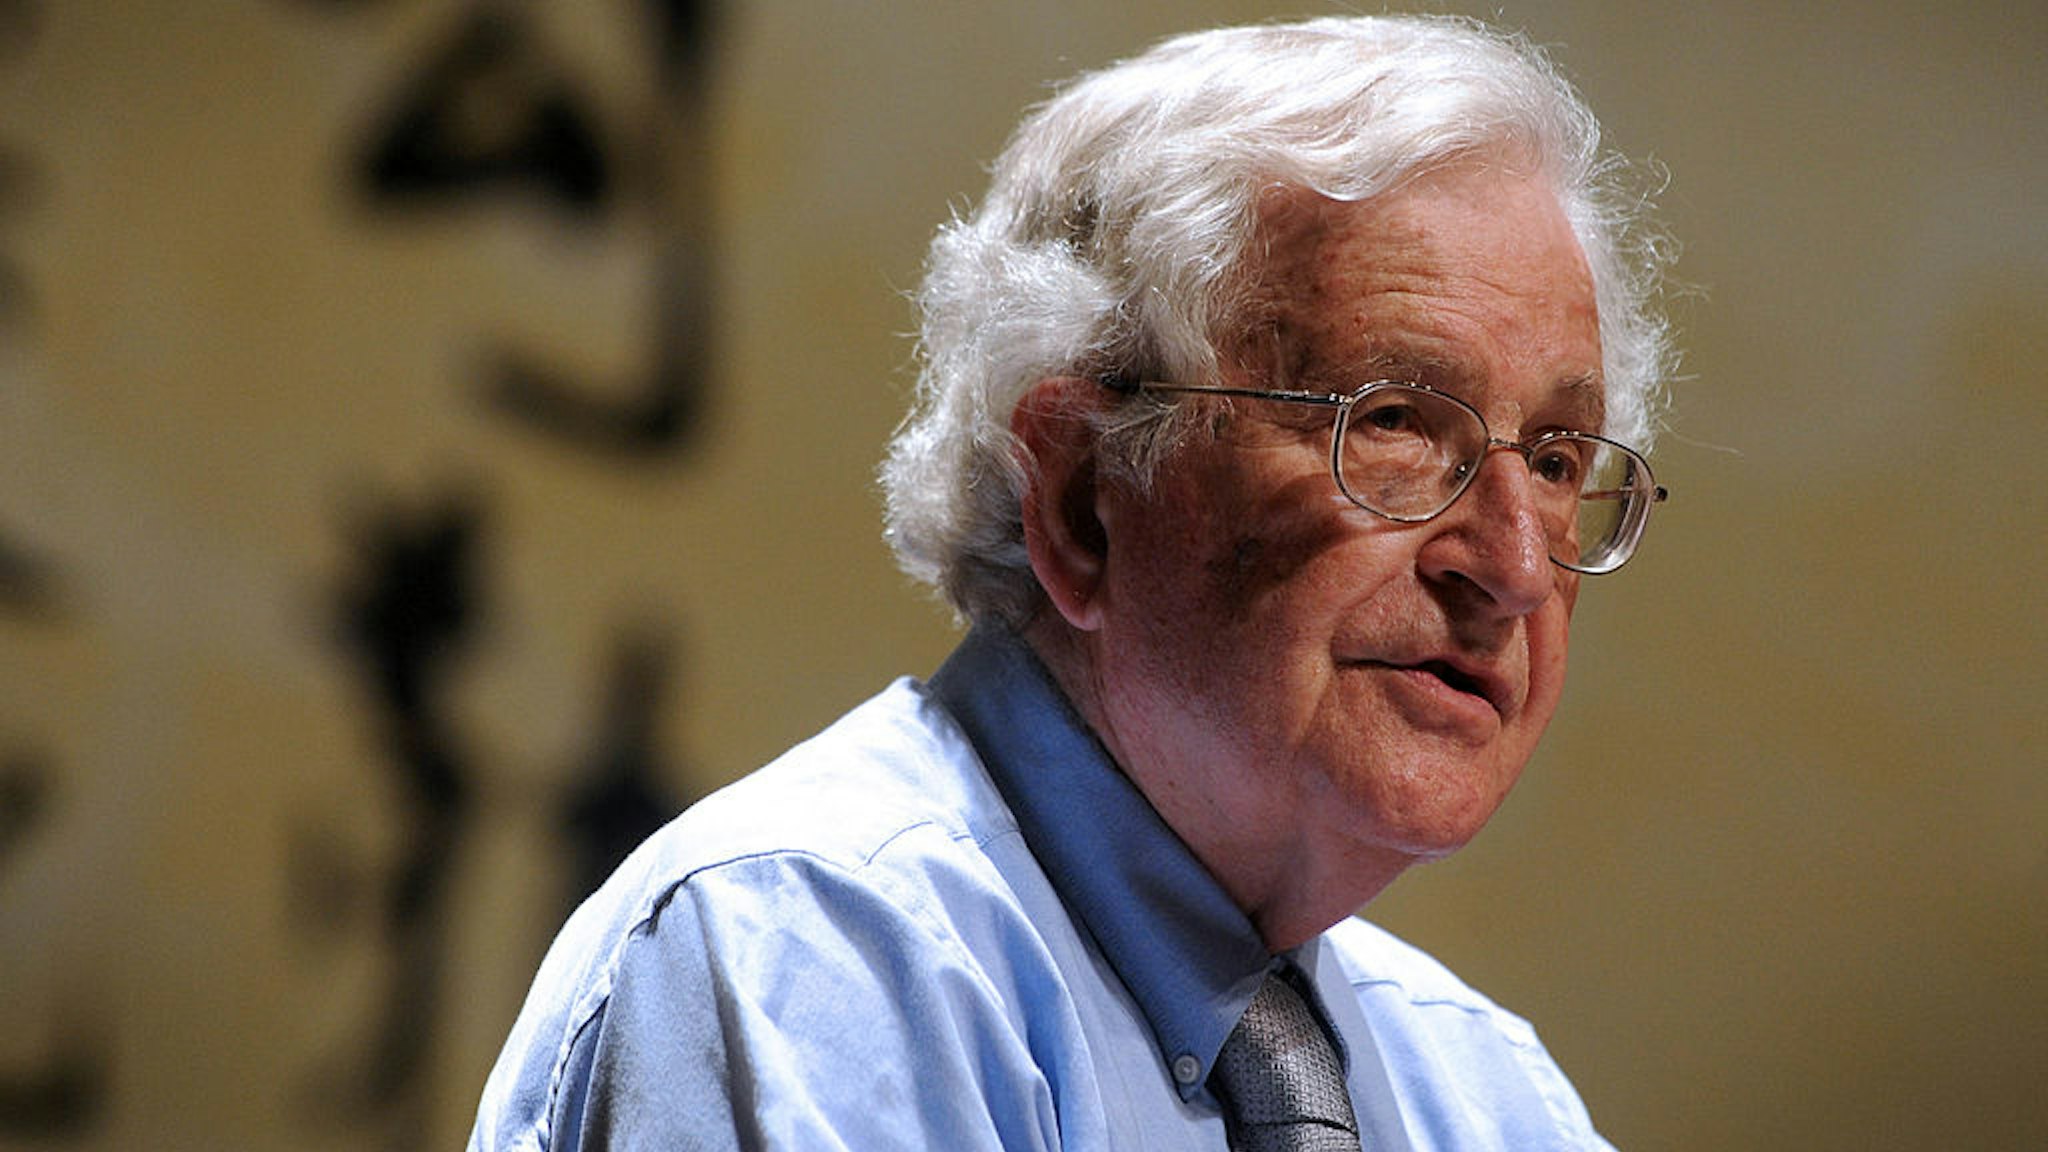 BEIJING - AUGUST 13: (CHINA OUT) Noam Chomsky lectures during the ceremony for the Conferment of the Honorary Doctorate at Peking University on August 13, 2010 in Beijing, China. (Photo by Visual China Group via Getty Images)